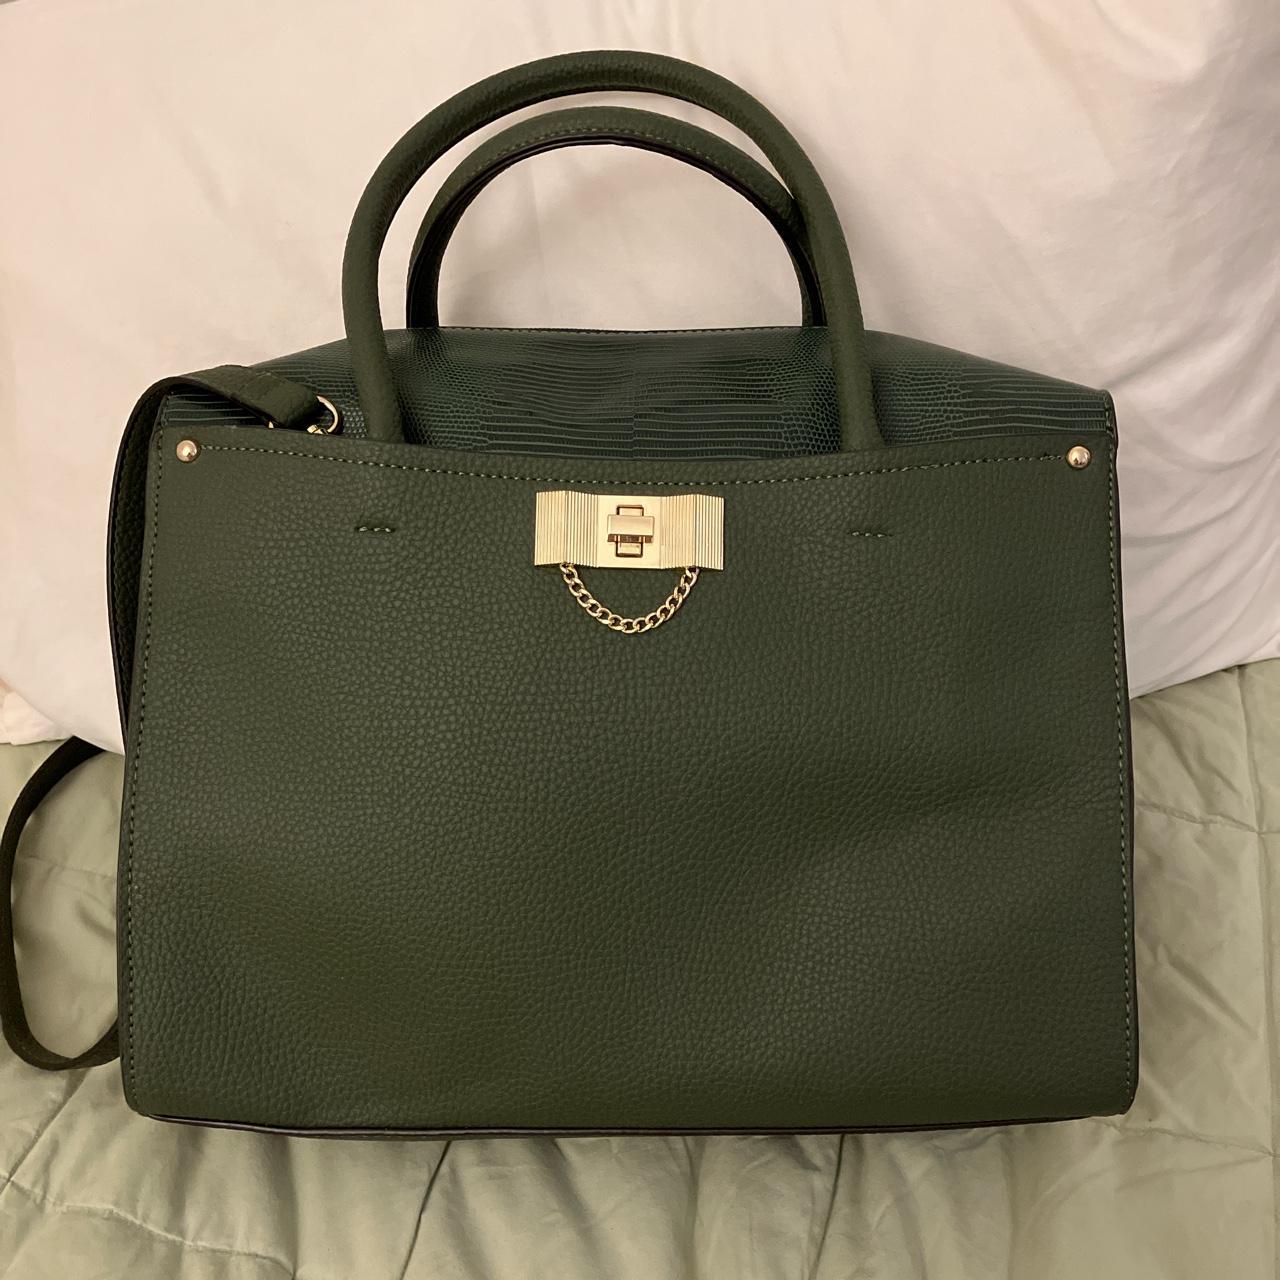 I love my first Strathberry bag, in bottle green. I thought I'd use it for  special occasions only but decided to take her mattress shopping today. 😍  The perfect minimal handbag for